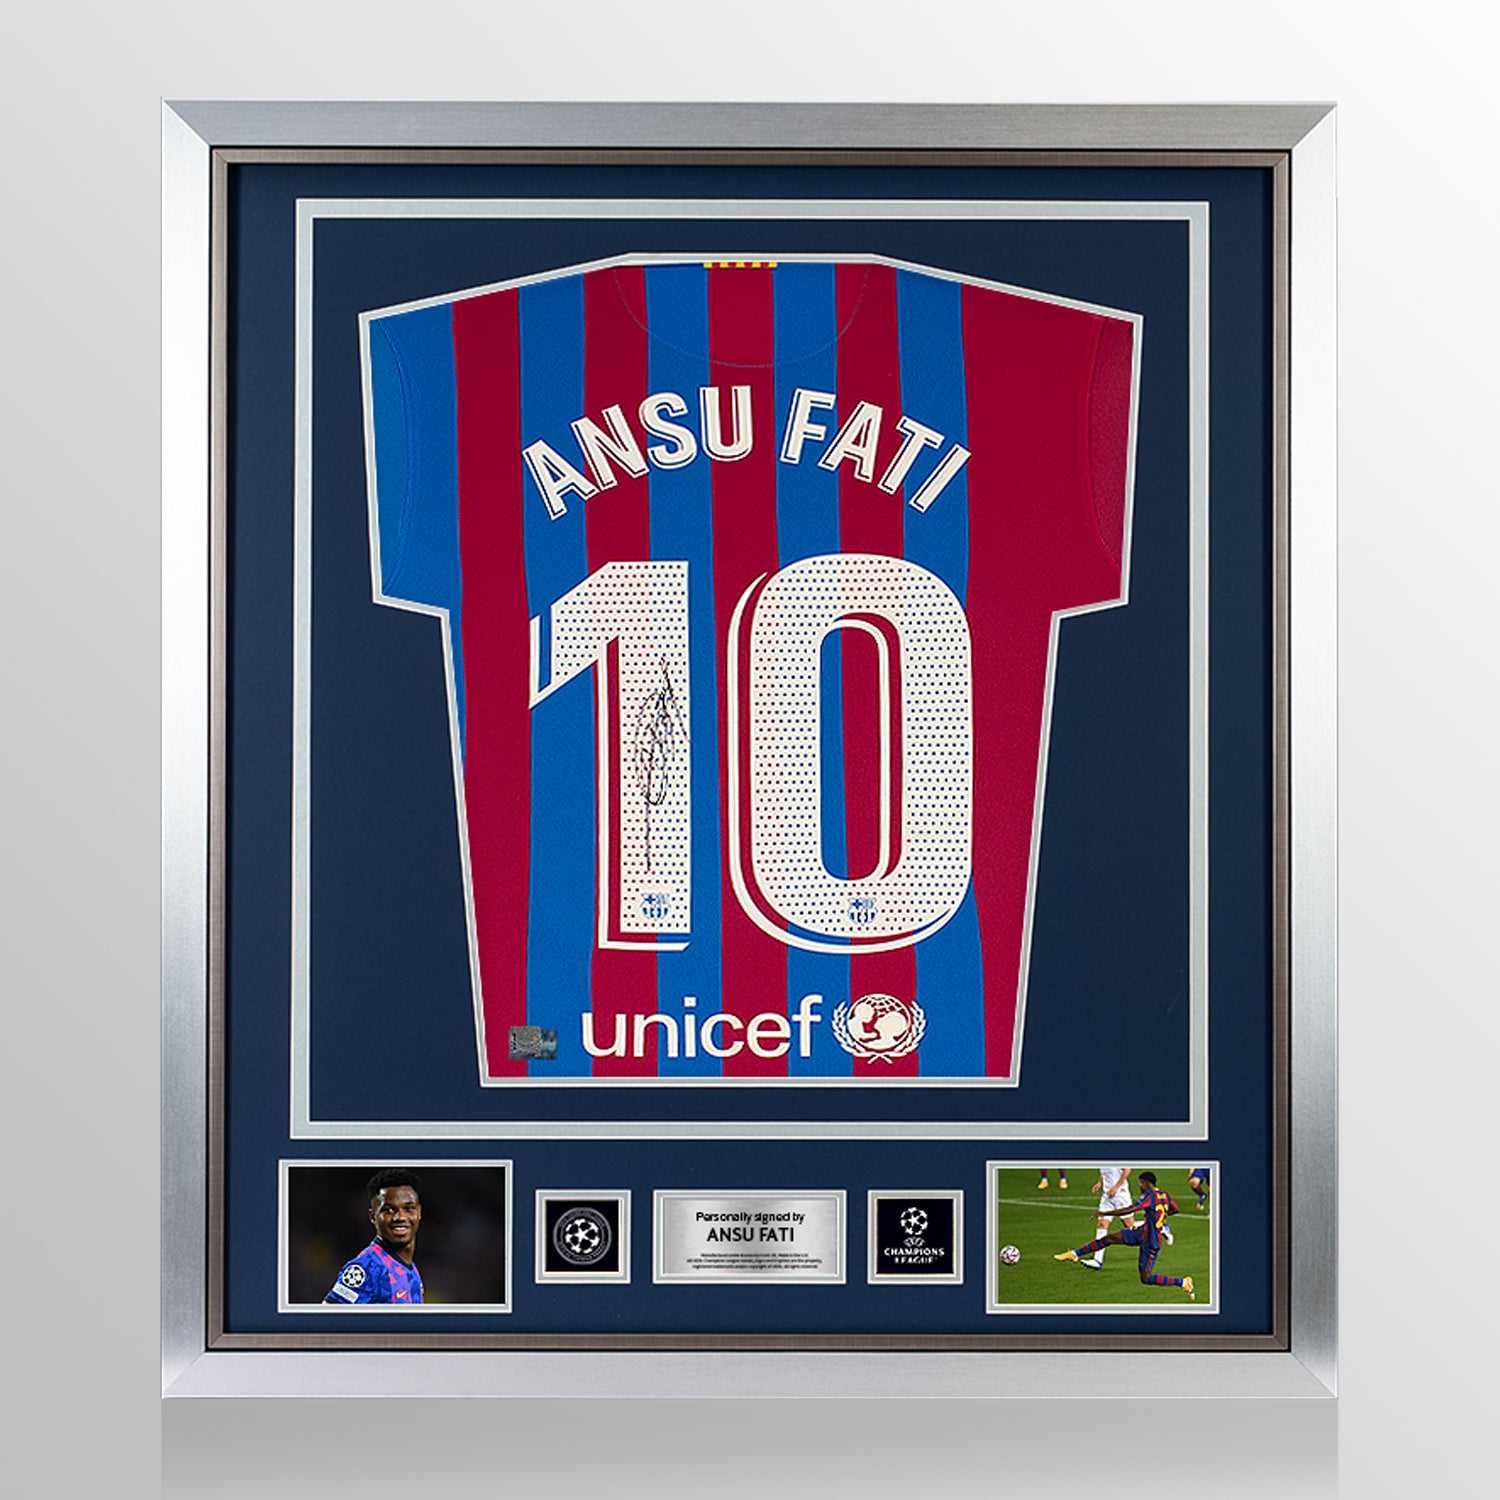 Ansu Fati Official UEFA Champions League Back Signed and Framed FC Barcelona 2021-22 Home Shirt UEFA Club Competitions Online Store